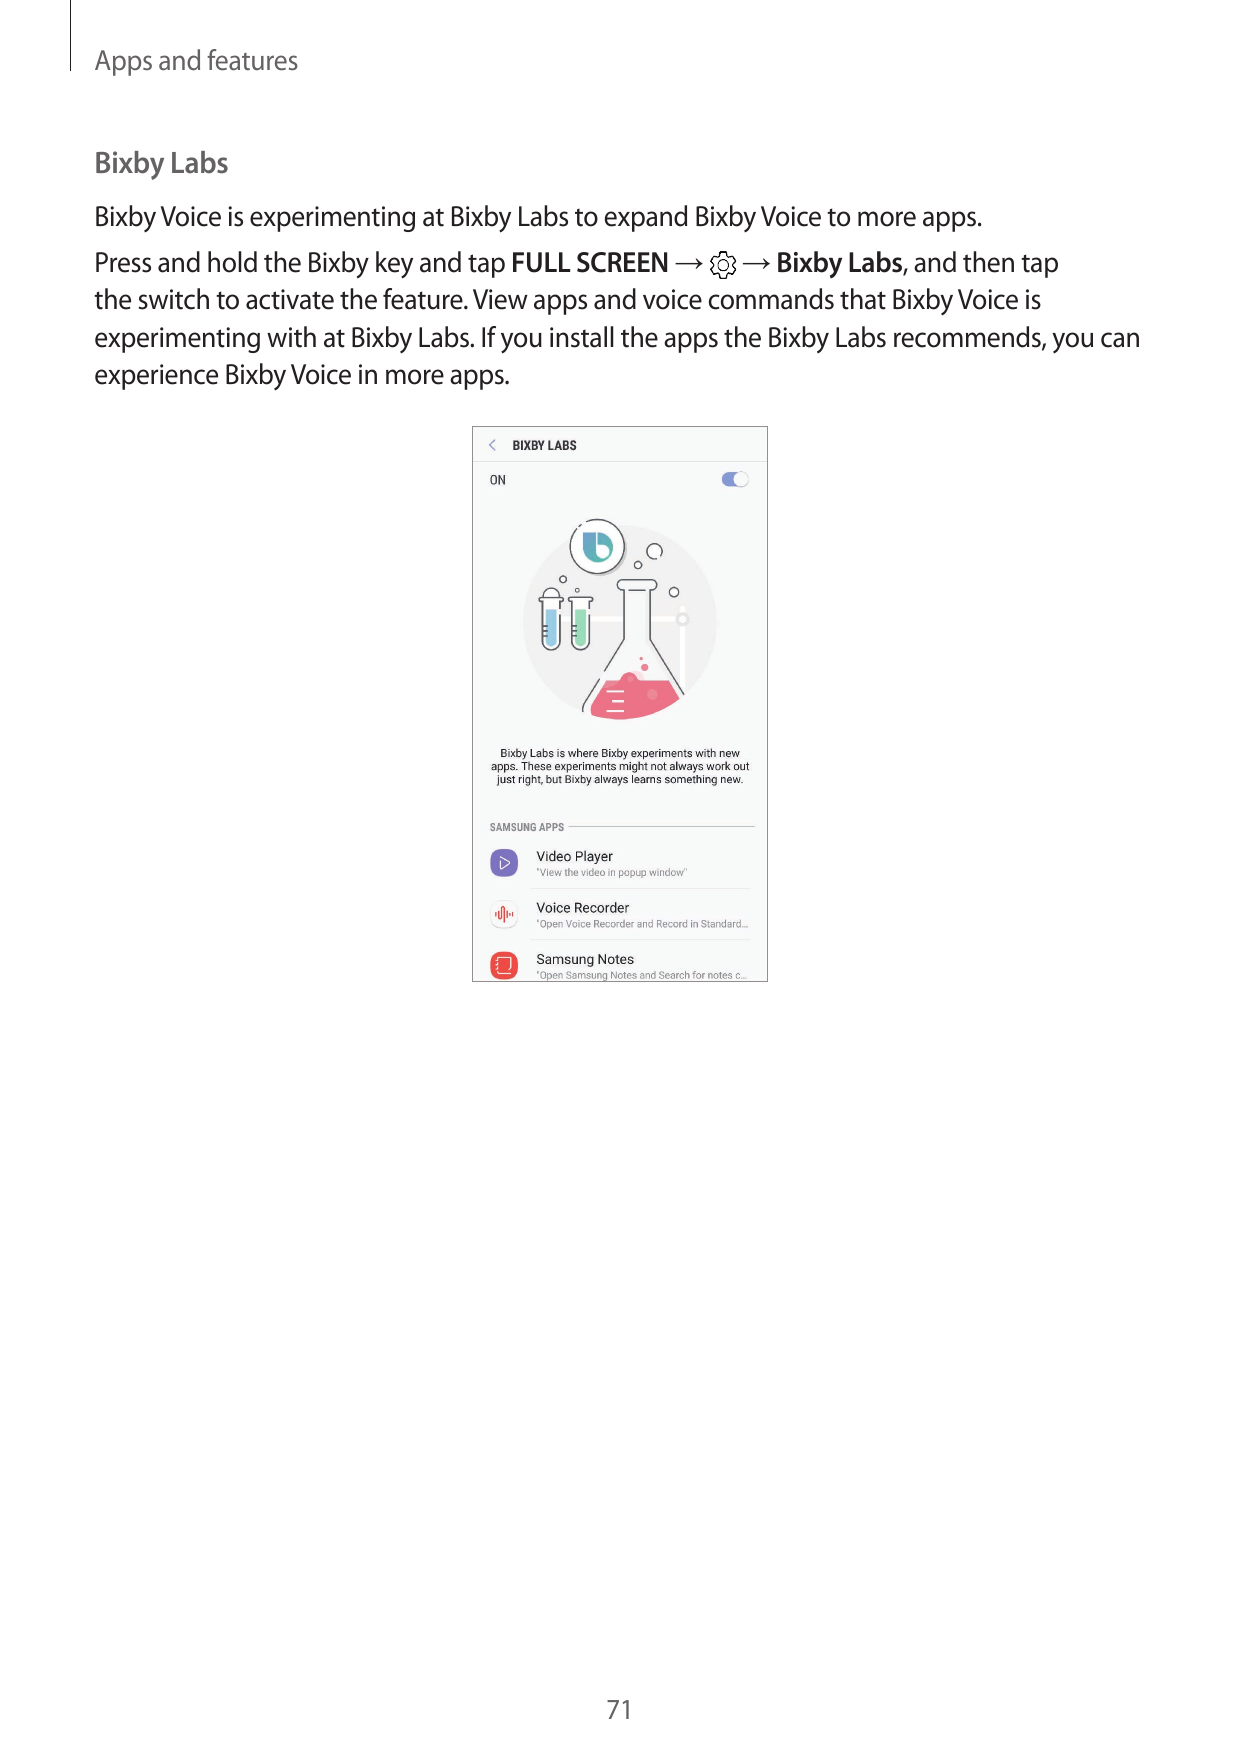 Apps and featuresBixby LabsBixby Voice is experimenting at Bixby Labs to expand Bixby Voice to more apps.Press and hold the Bixb